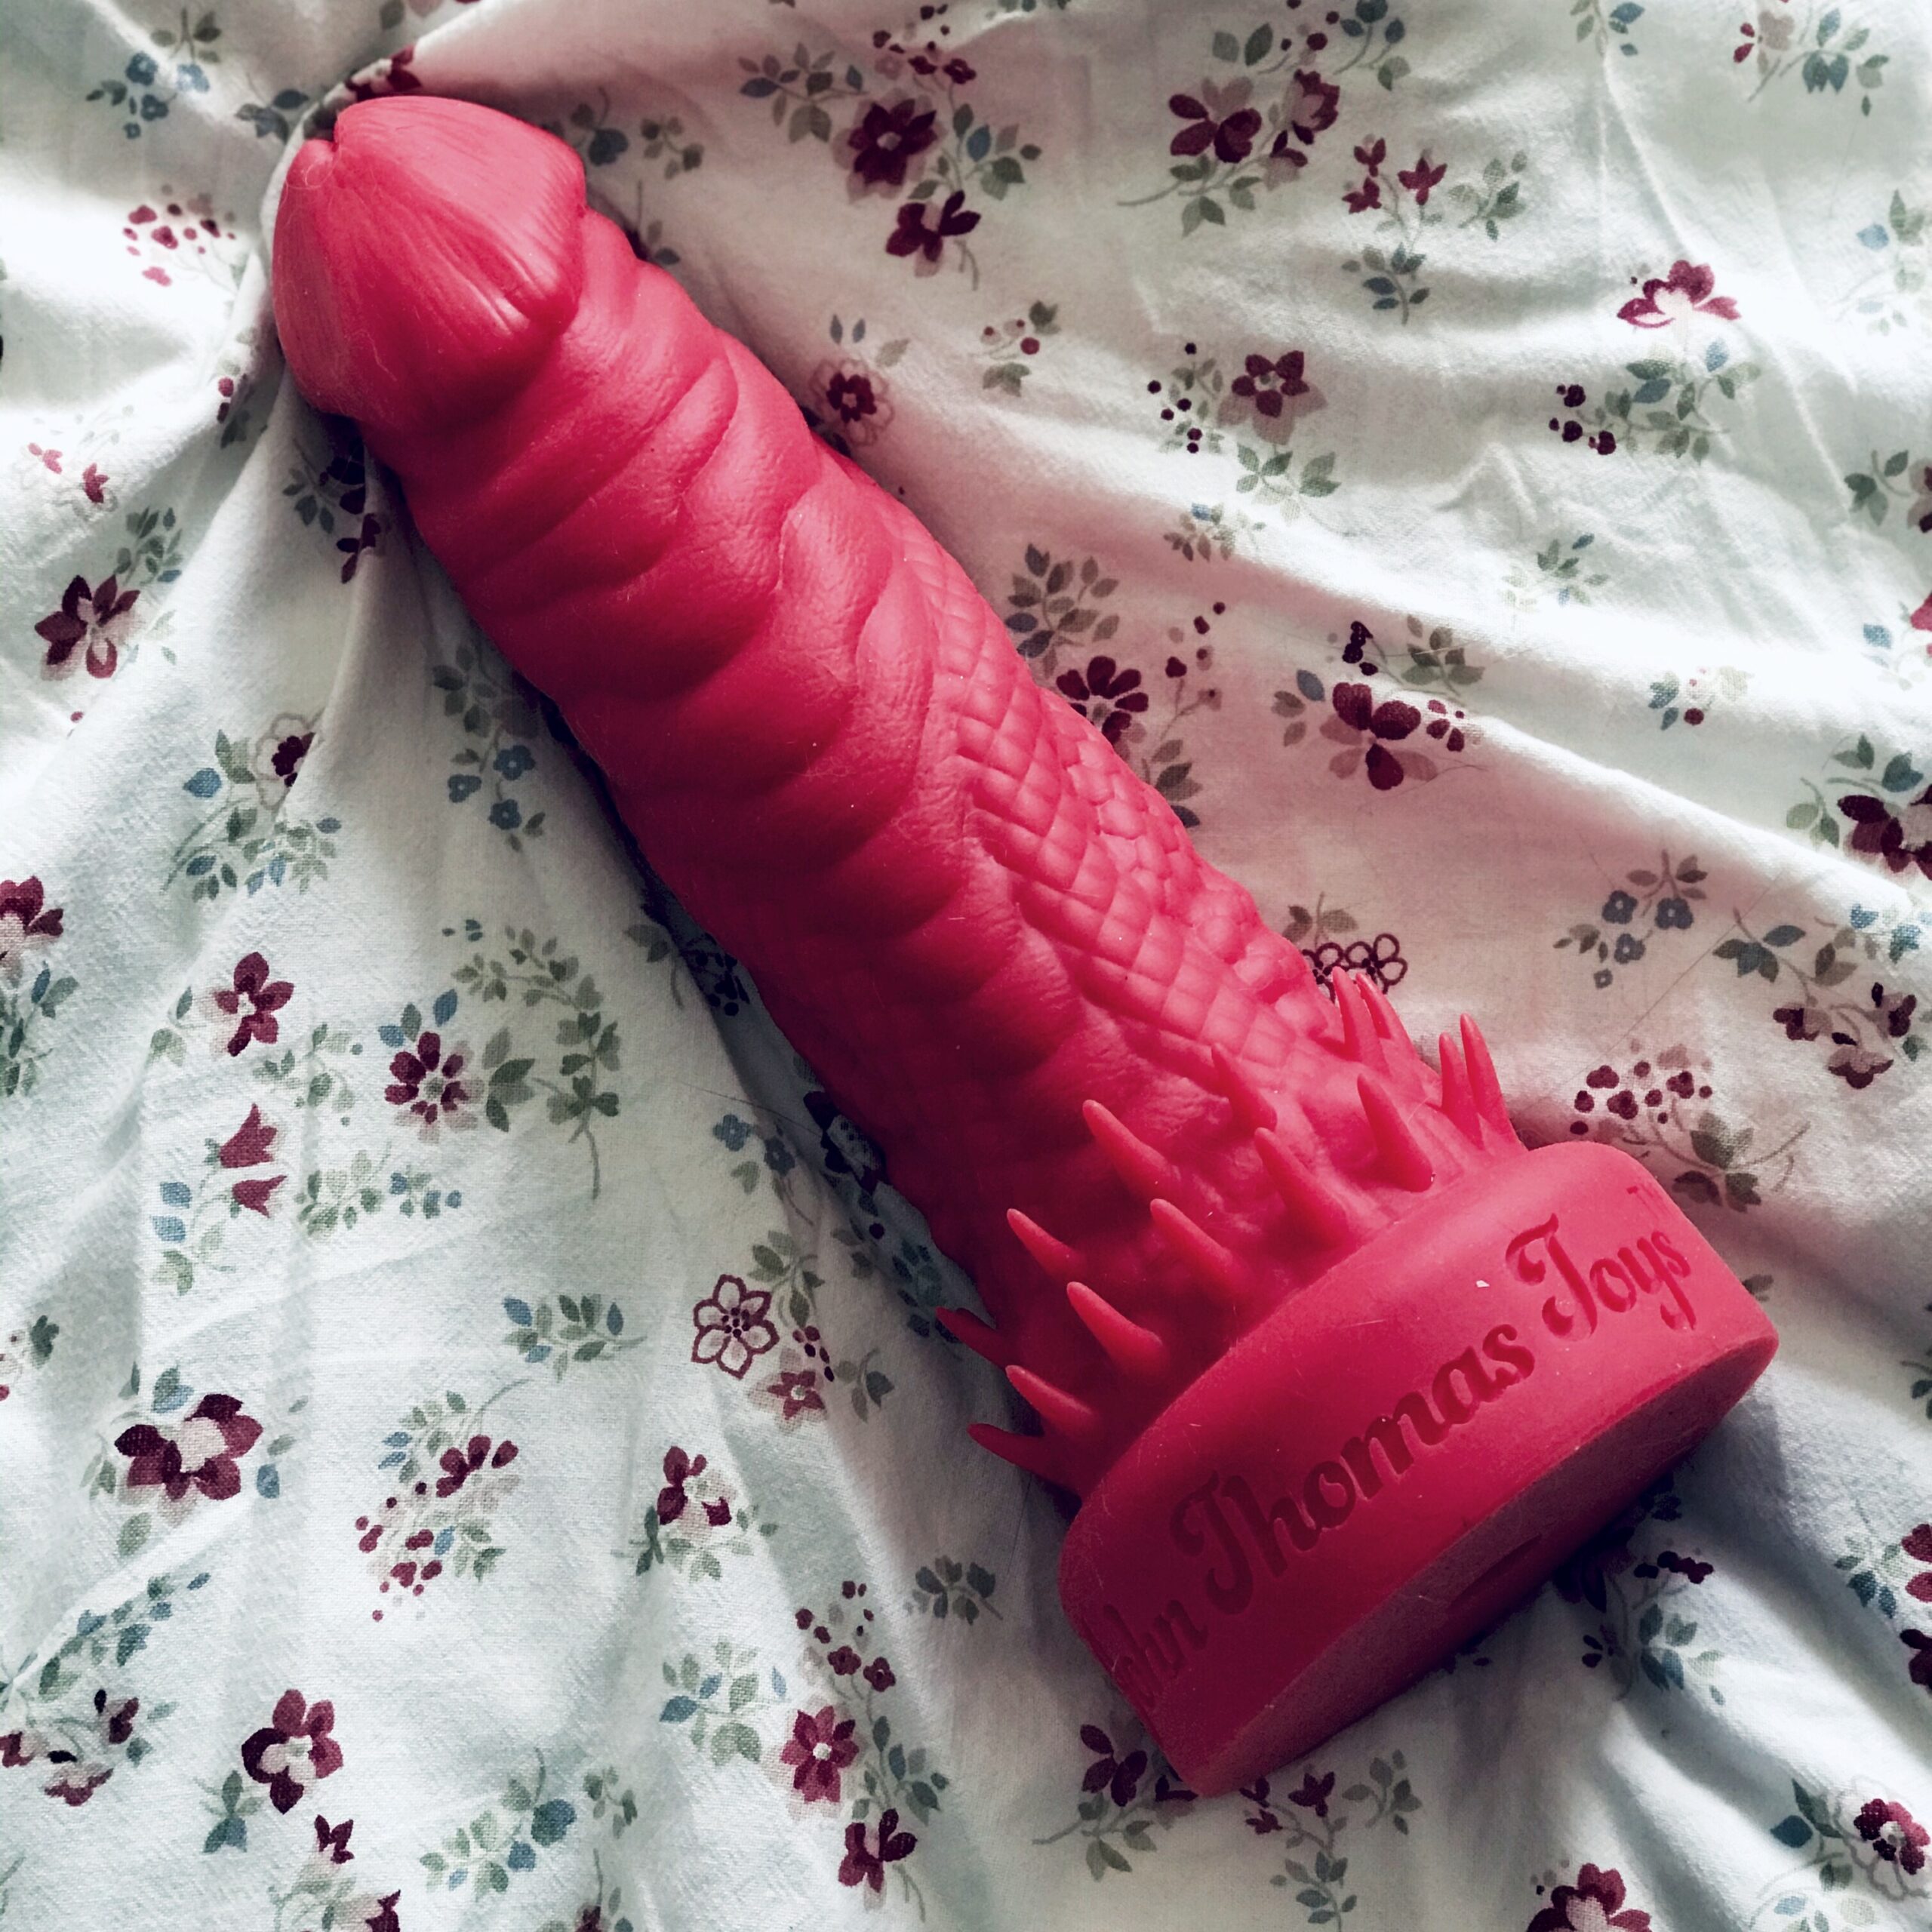 A red Barabarian dildo from John Thomas Toys lays on a duvet covered in an all over floral pattern of red and pink roses. Delicate, feminine floral vs 12" of silicone shaped like and alien dragon penis.